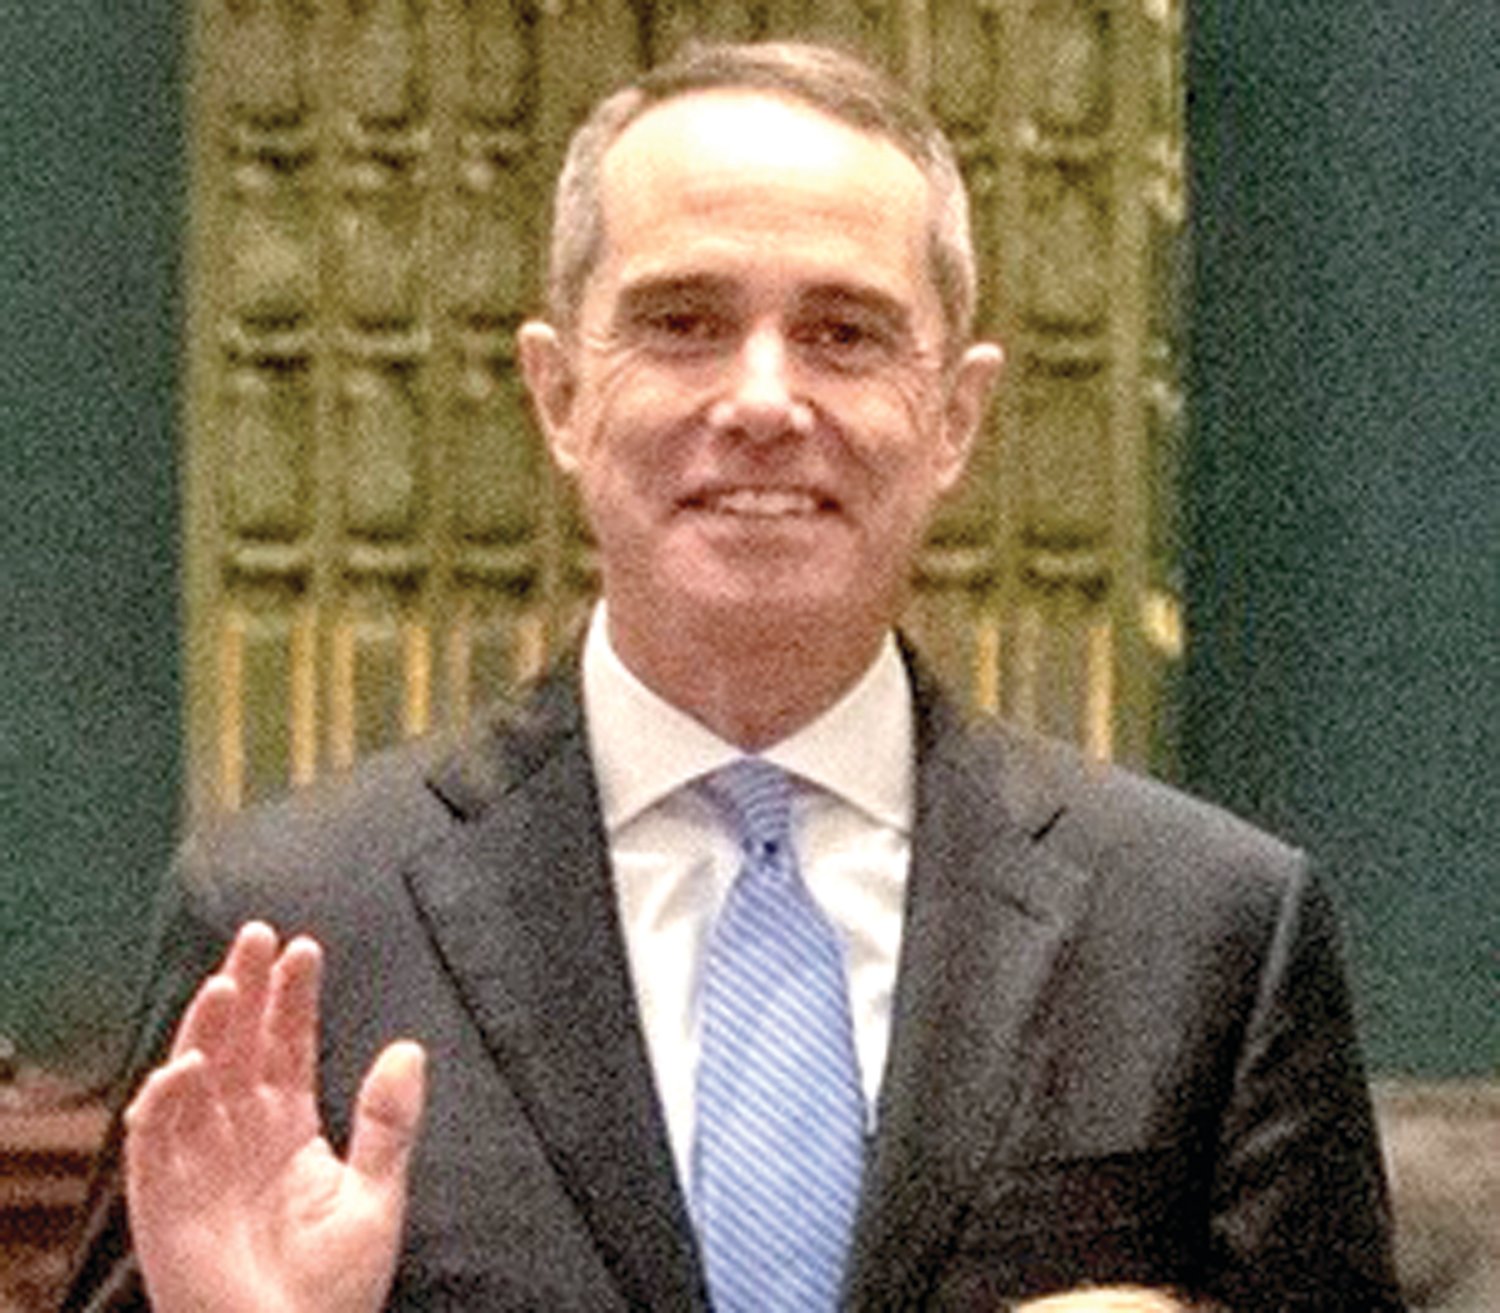 Sen. Steve Santarsiero, a Democrat, represents the 10th PA Senatorial District, which consists of Bristol, Buckingham, Doylestown, Falls, Lower Makefield, New Britain, Newtown, Plumstead, Solebury and Upper Makefield townships as well as the boroughs of Bristol, Chalfont, Doylestown, Morrisville, New Britain, New Hope, Newtown, Tullytown and Yardley. Reach his district office at 215-489-5000.